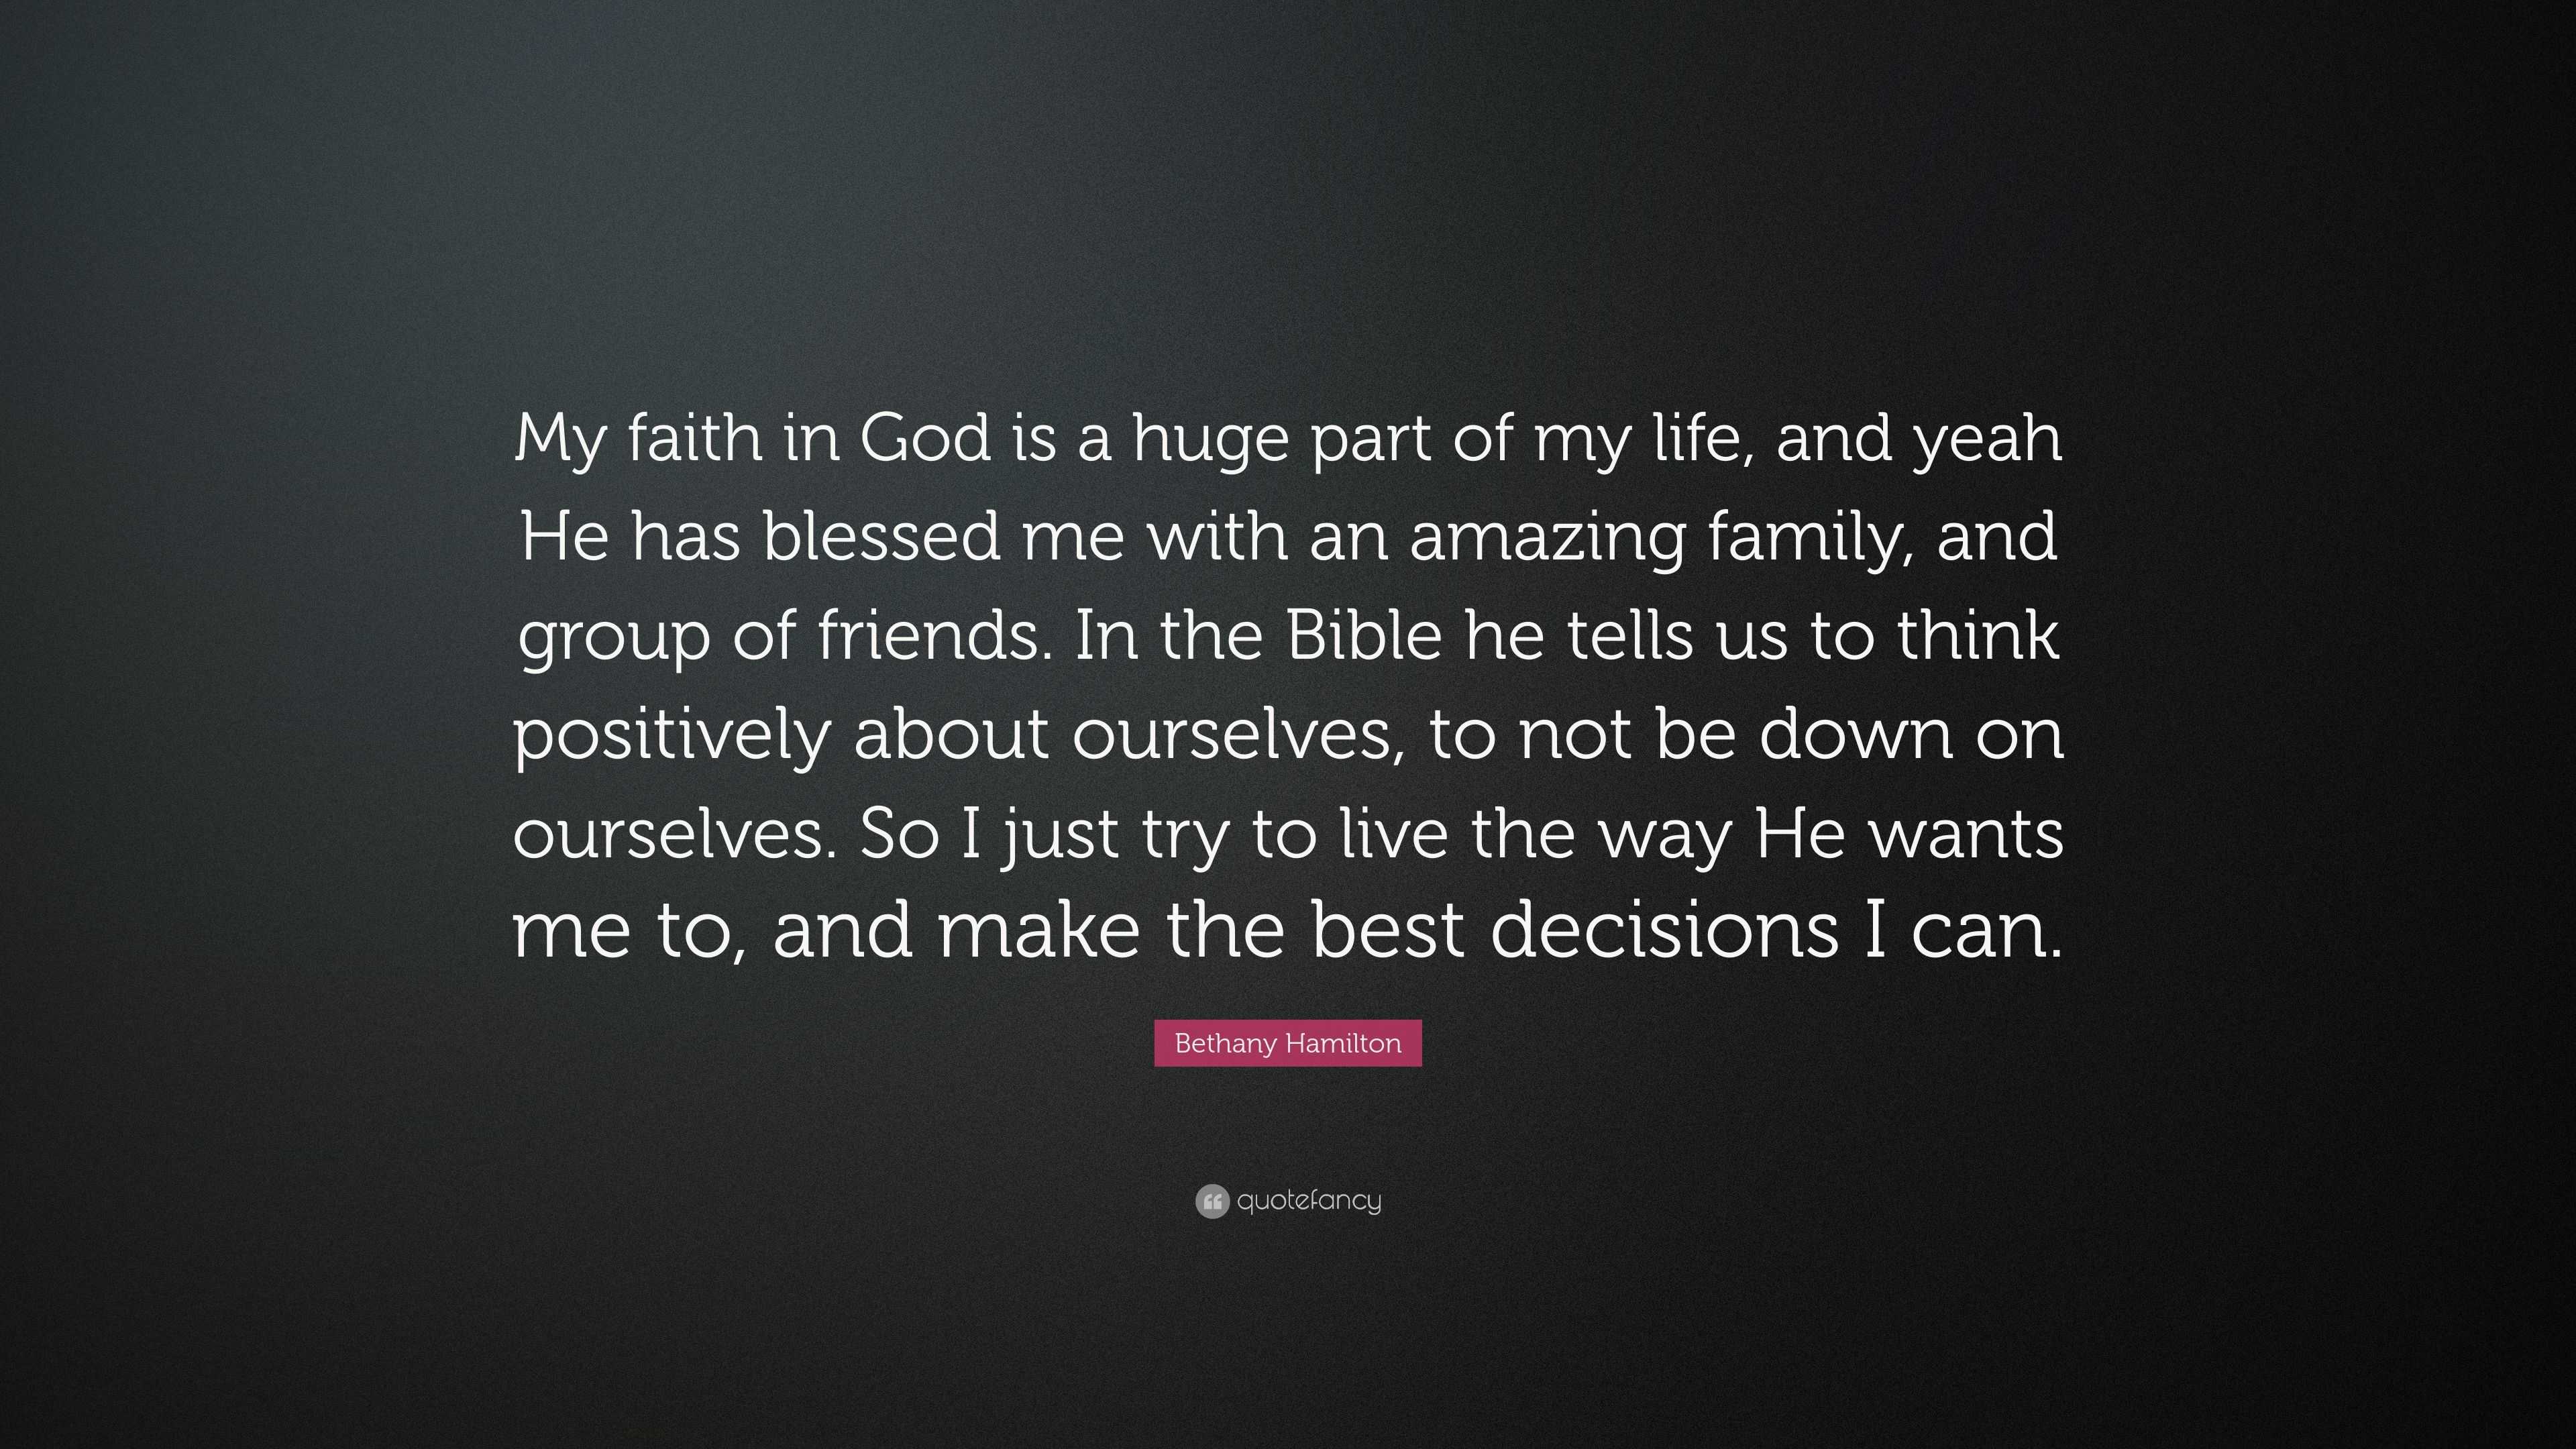 Bethany Hamilton Quote “My faith in God is a huge part of my life